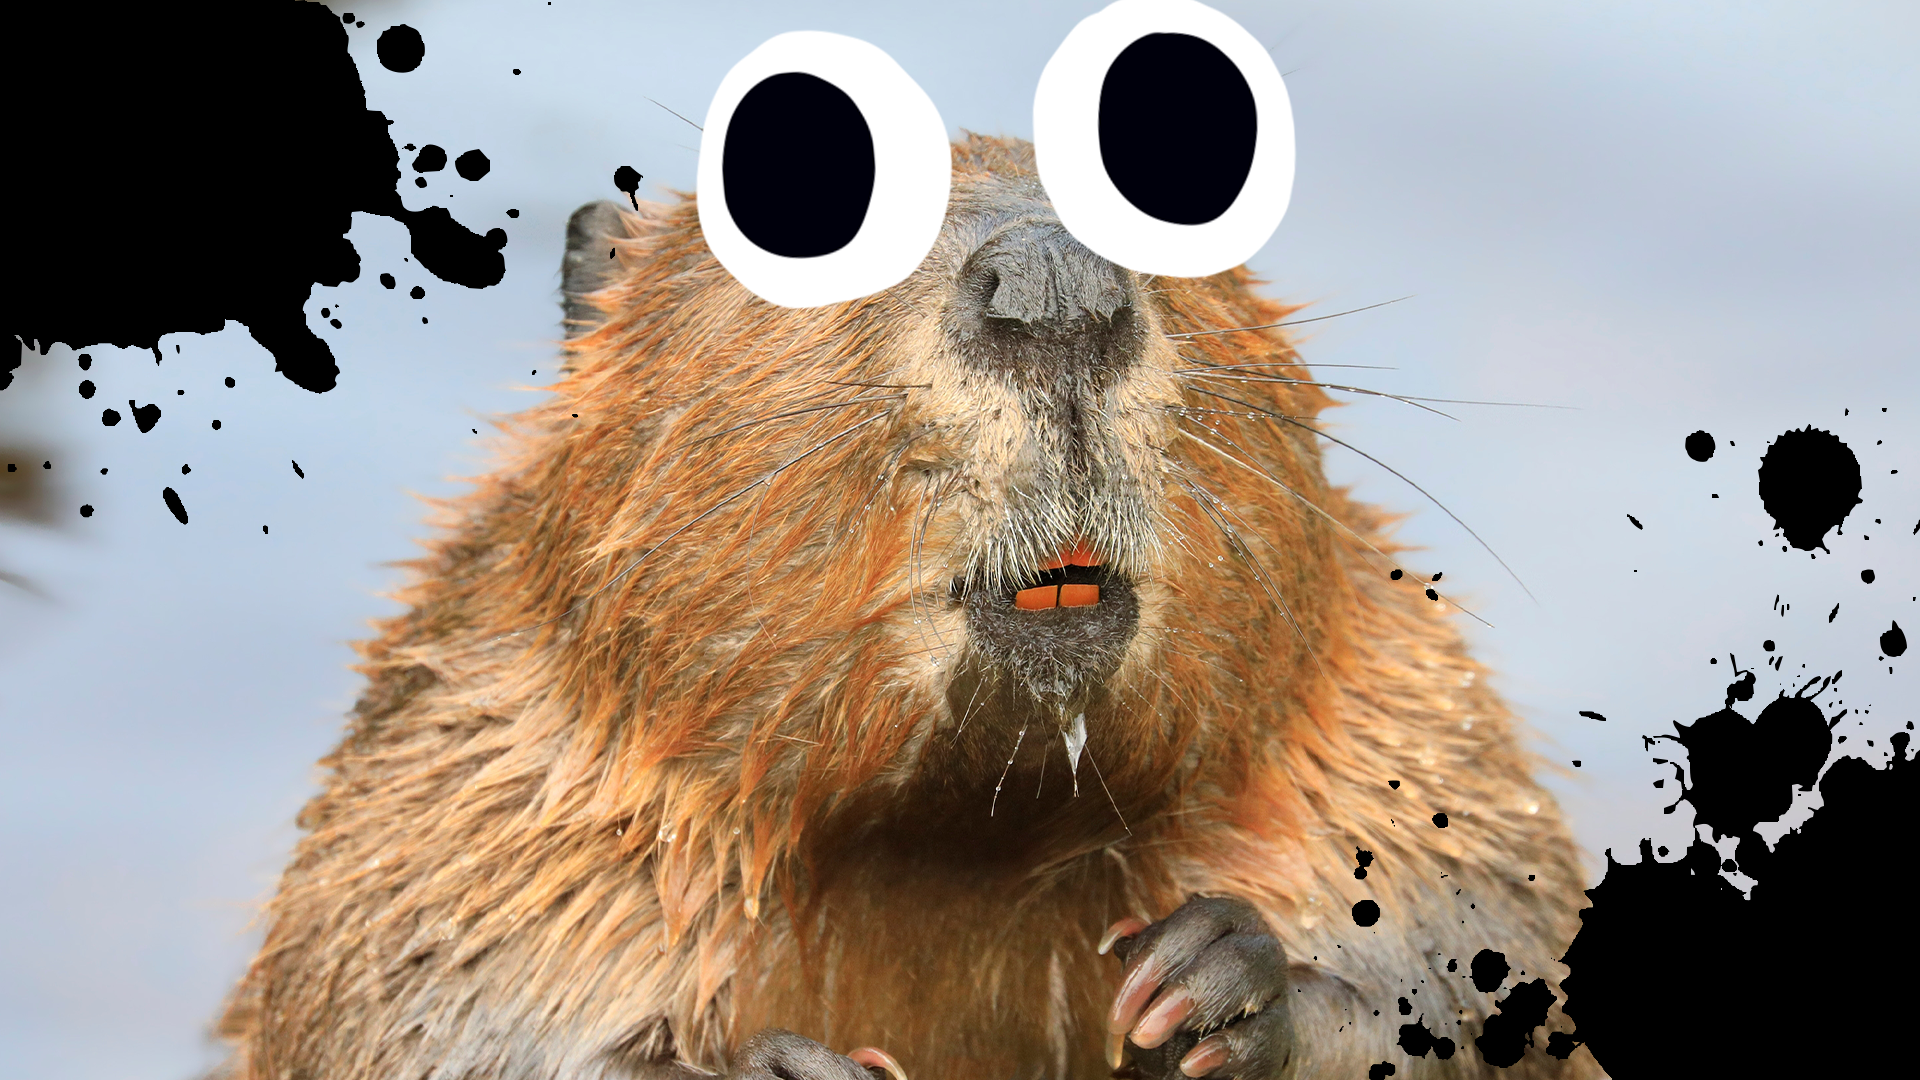 Beaver with splats